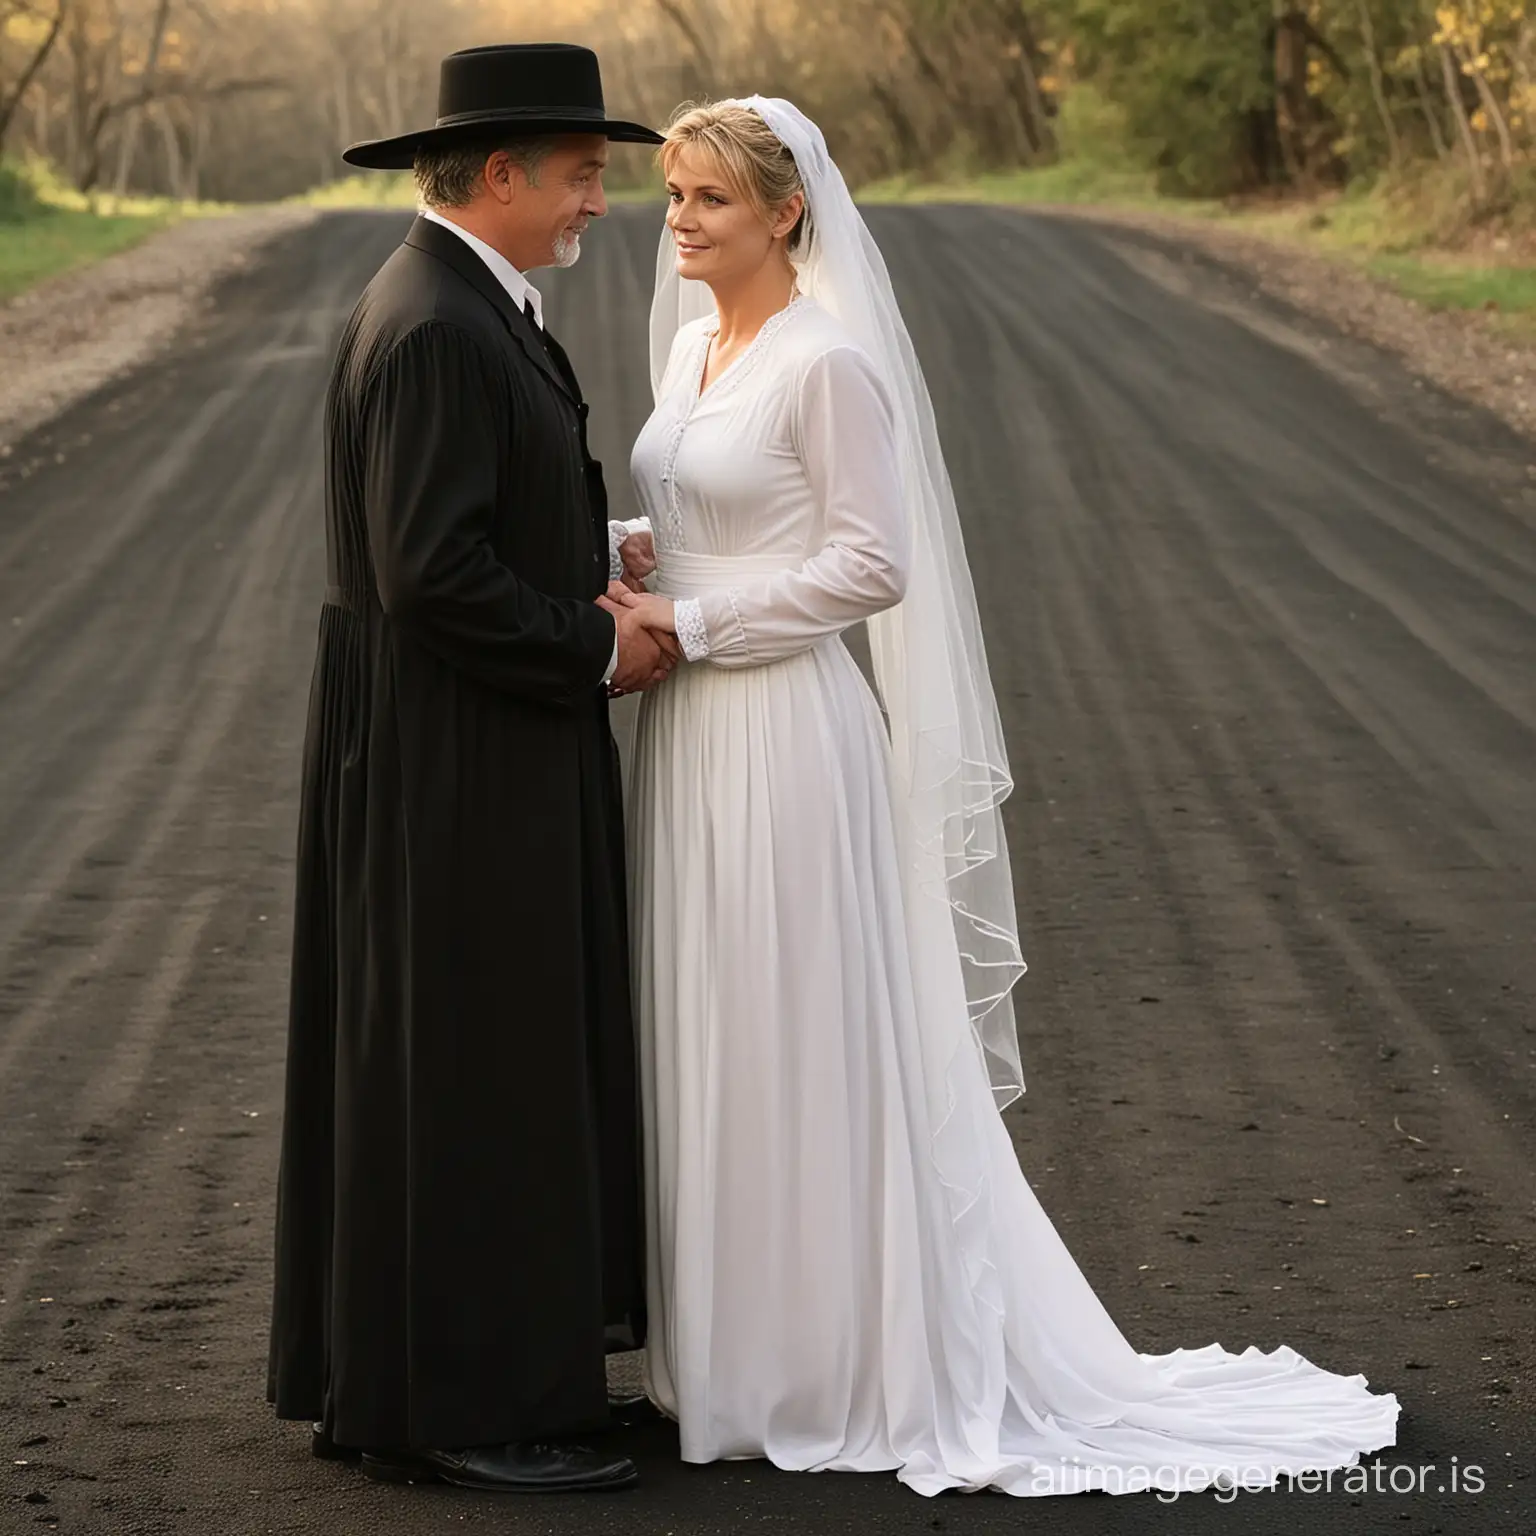 Amanda Tapping as Samantha Carter from SG1 , dressed and veiled as a prim and proper Amish wife in a black floor length traditional Amish dress , curtseying demurely in front of her 70 years old husband